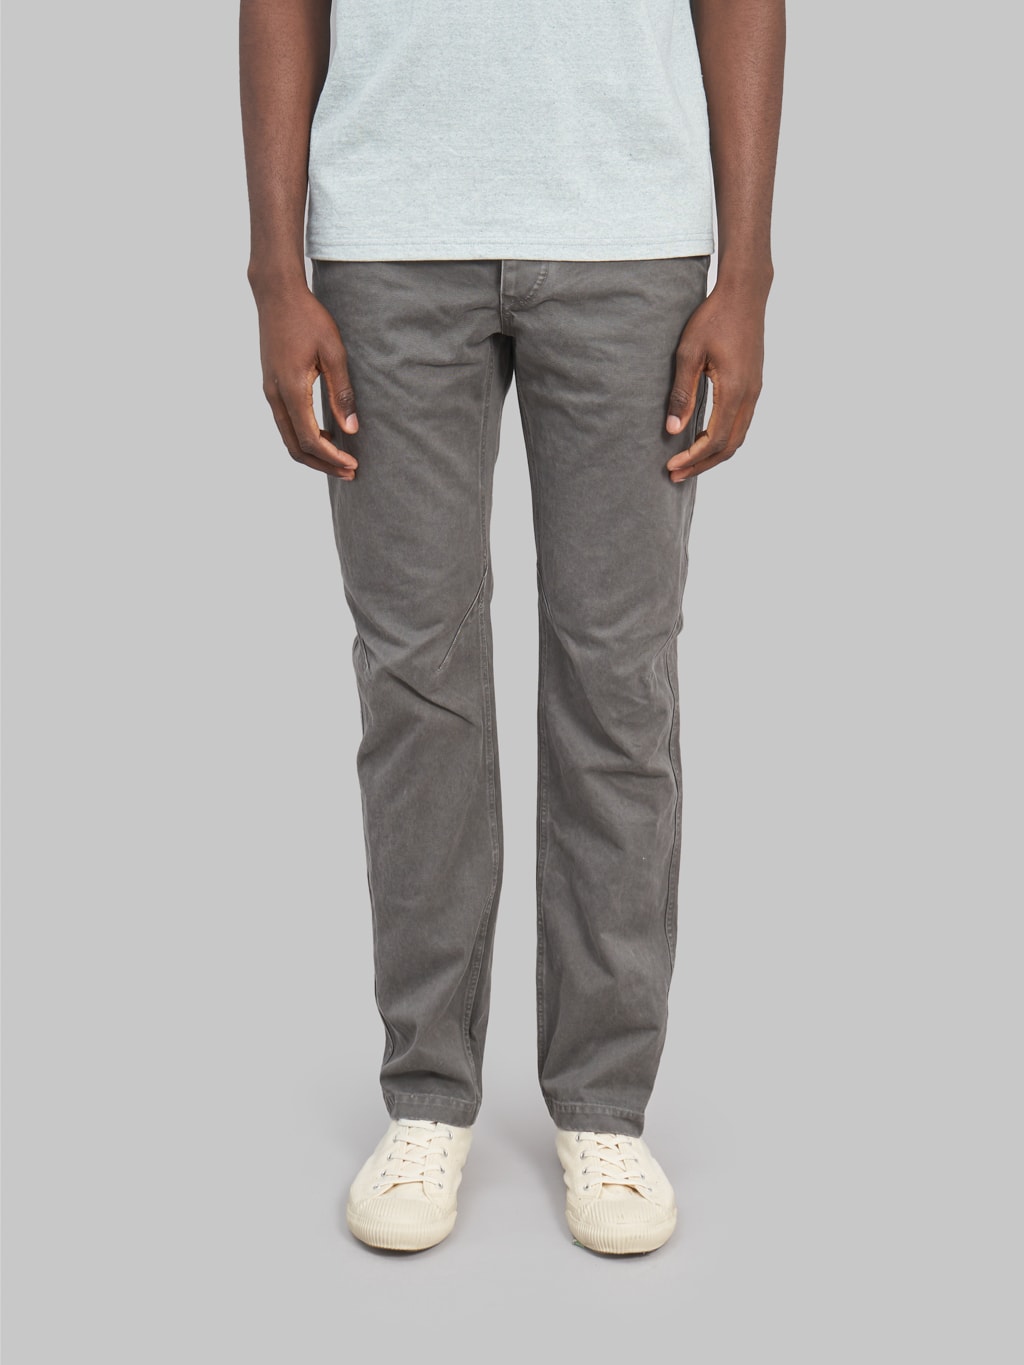 stevenson overall colts chinos v2 charcoal front